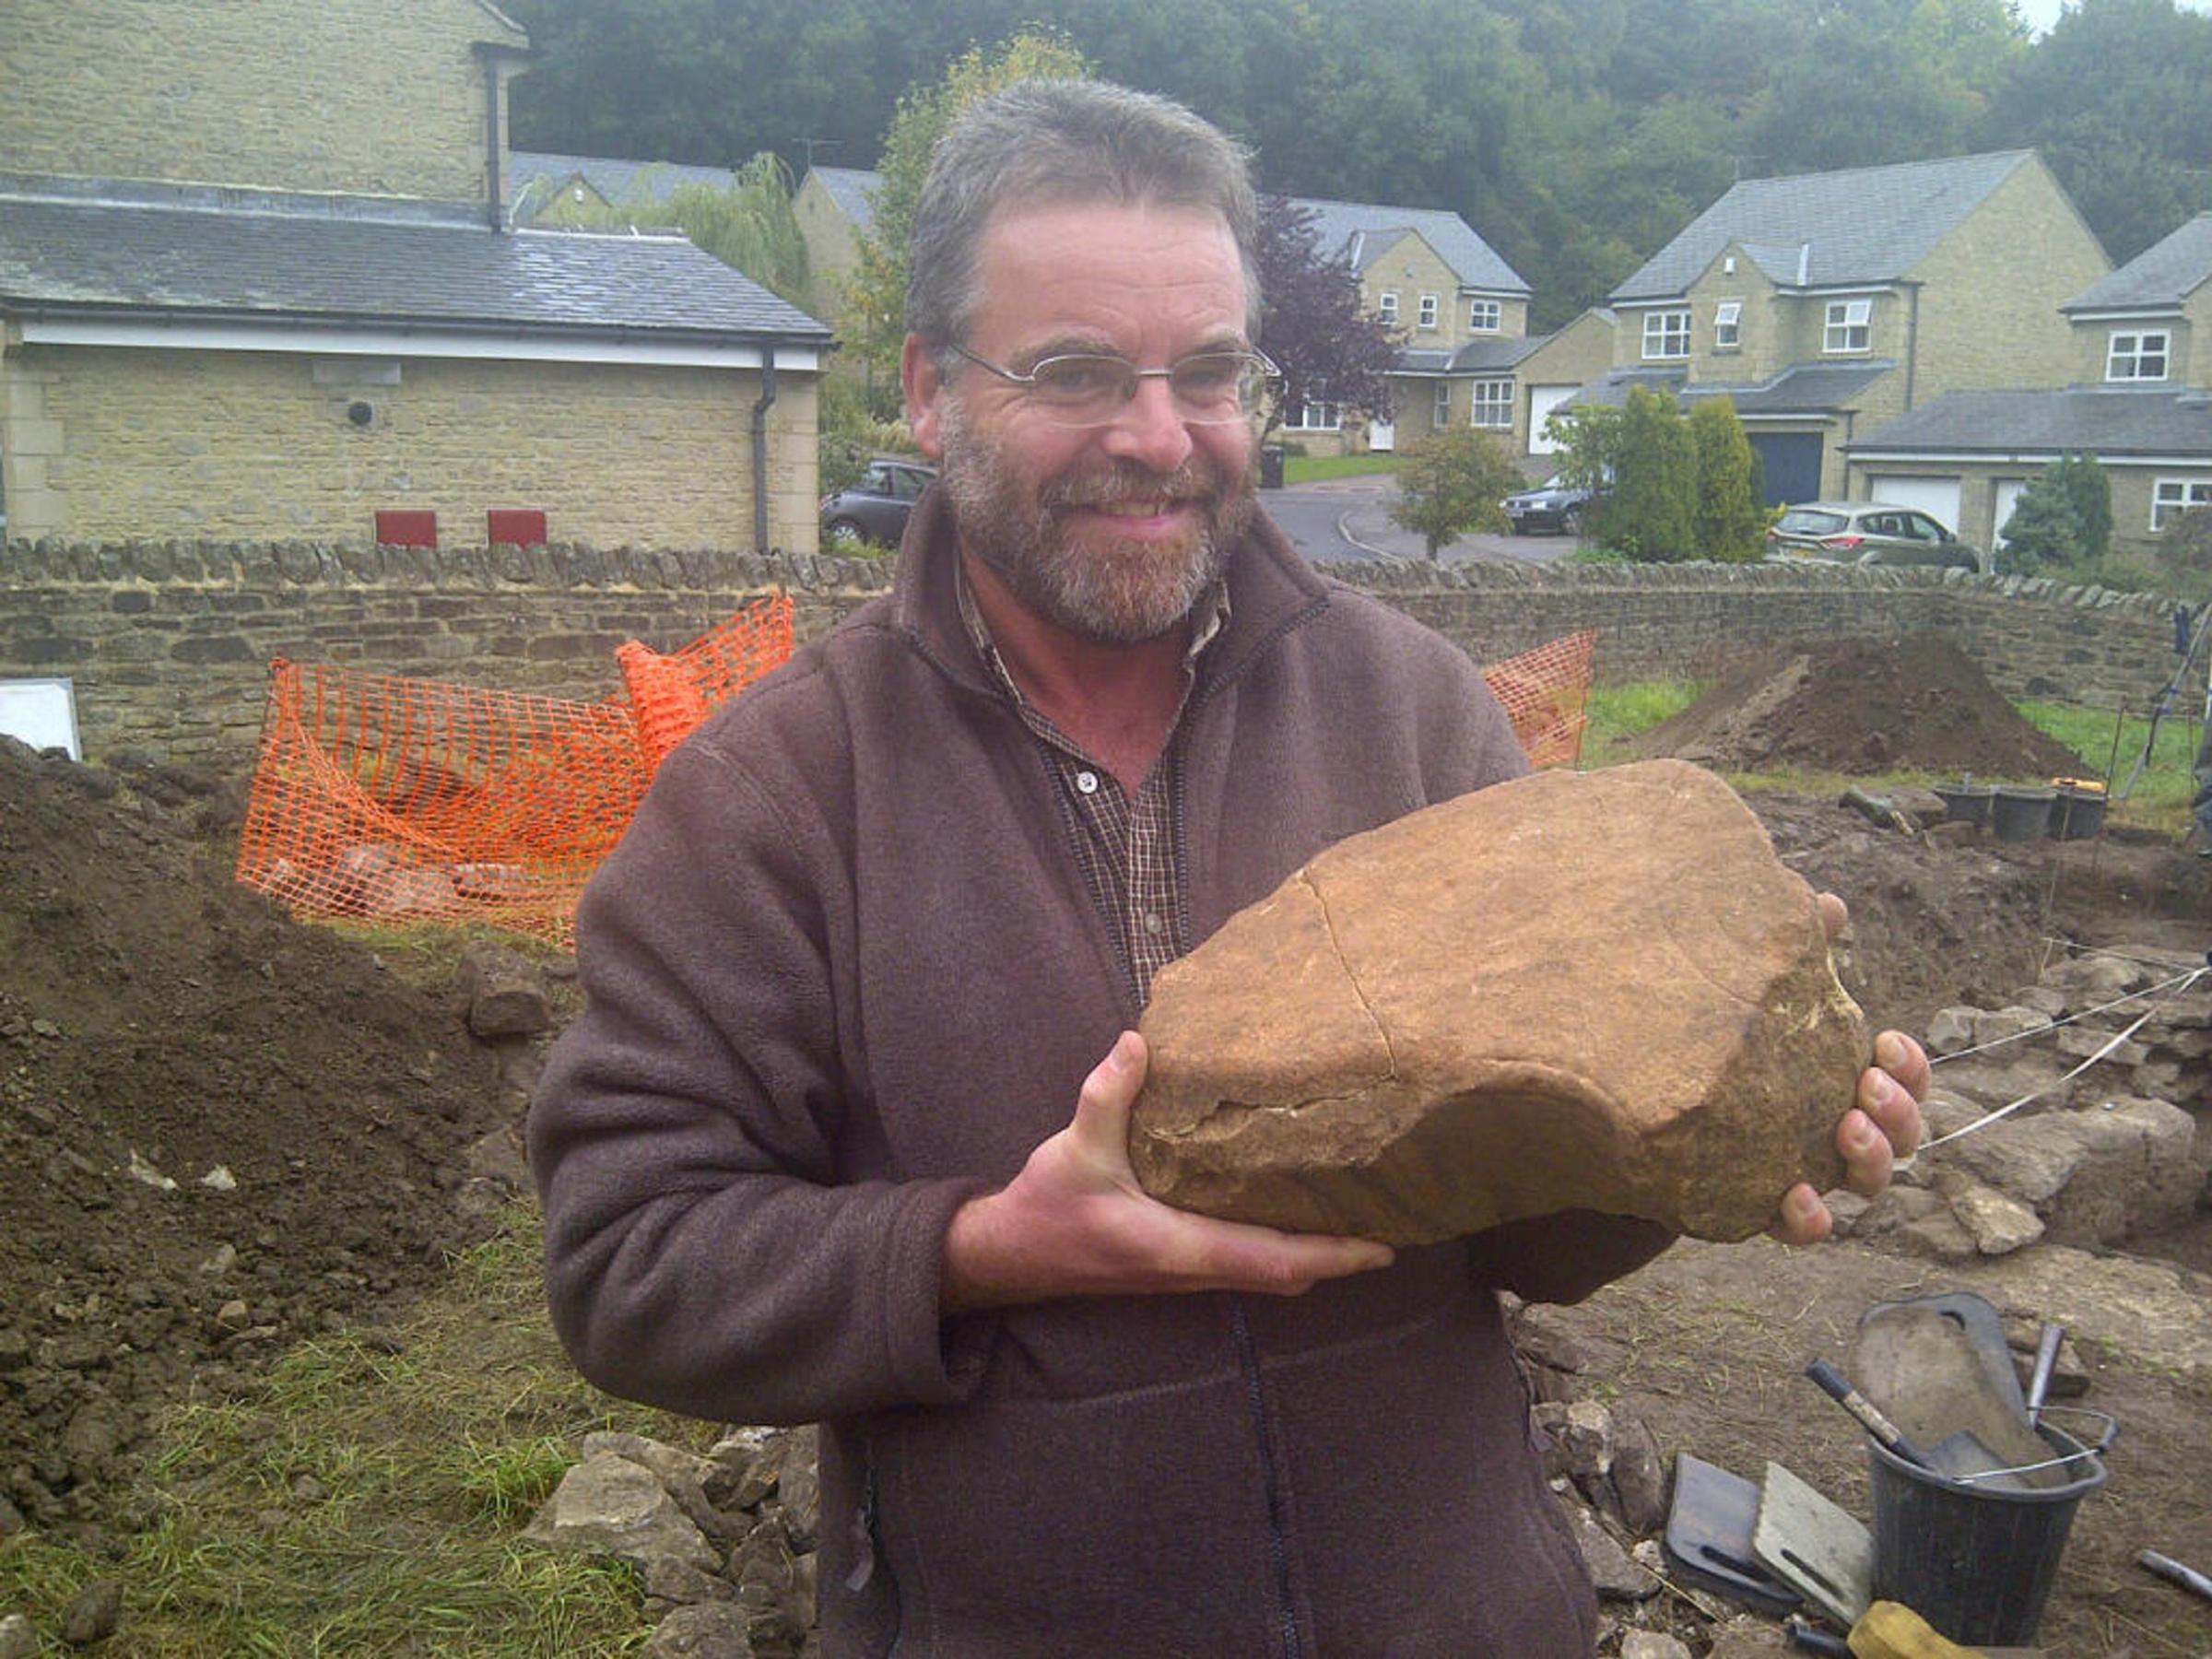 Paul Frodsham, of the AONB Partnership, shows off the section of an Anglo Saxon cross unearthed during a dig in Frosterley Paul Frodsham, of the AONB Partnership, shows off the section of an Anglo Saxon cross unearthed during a dig in Frosterley